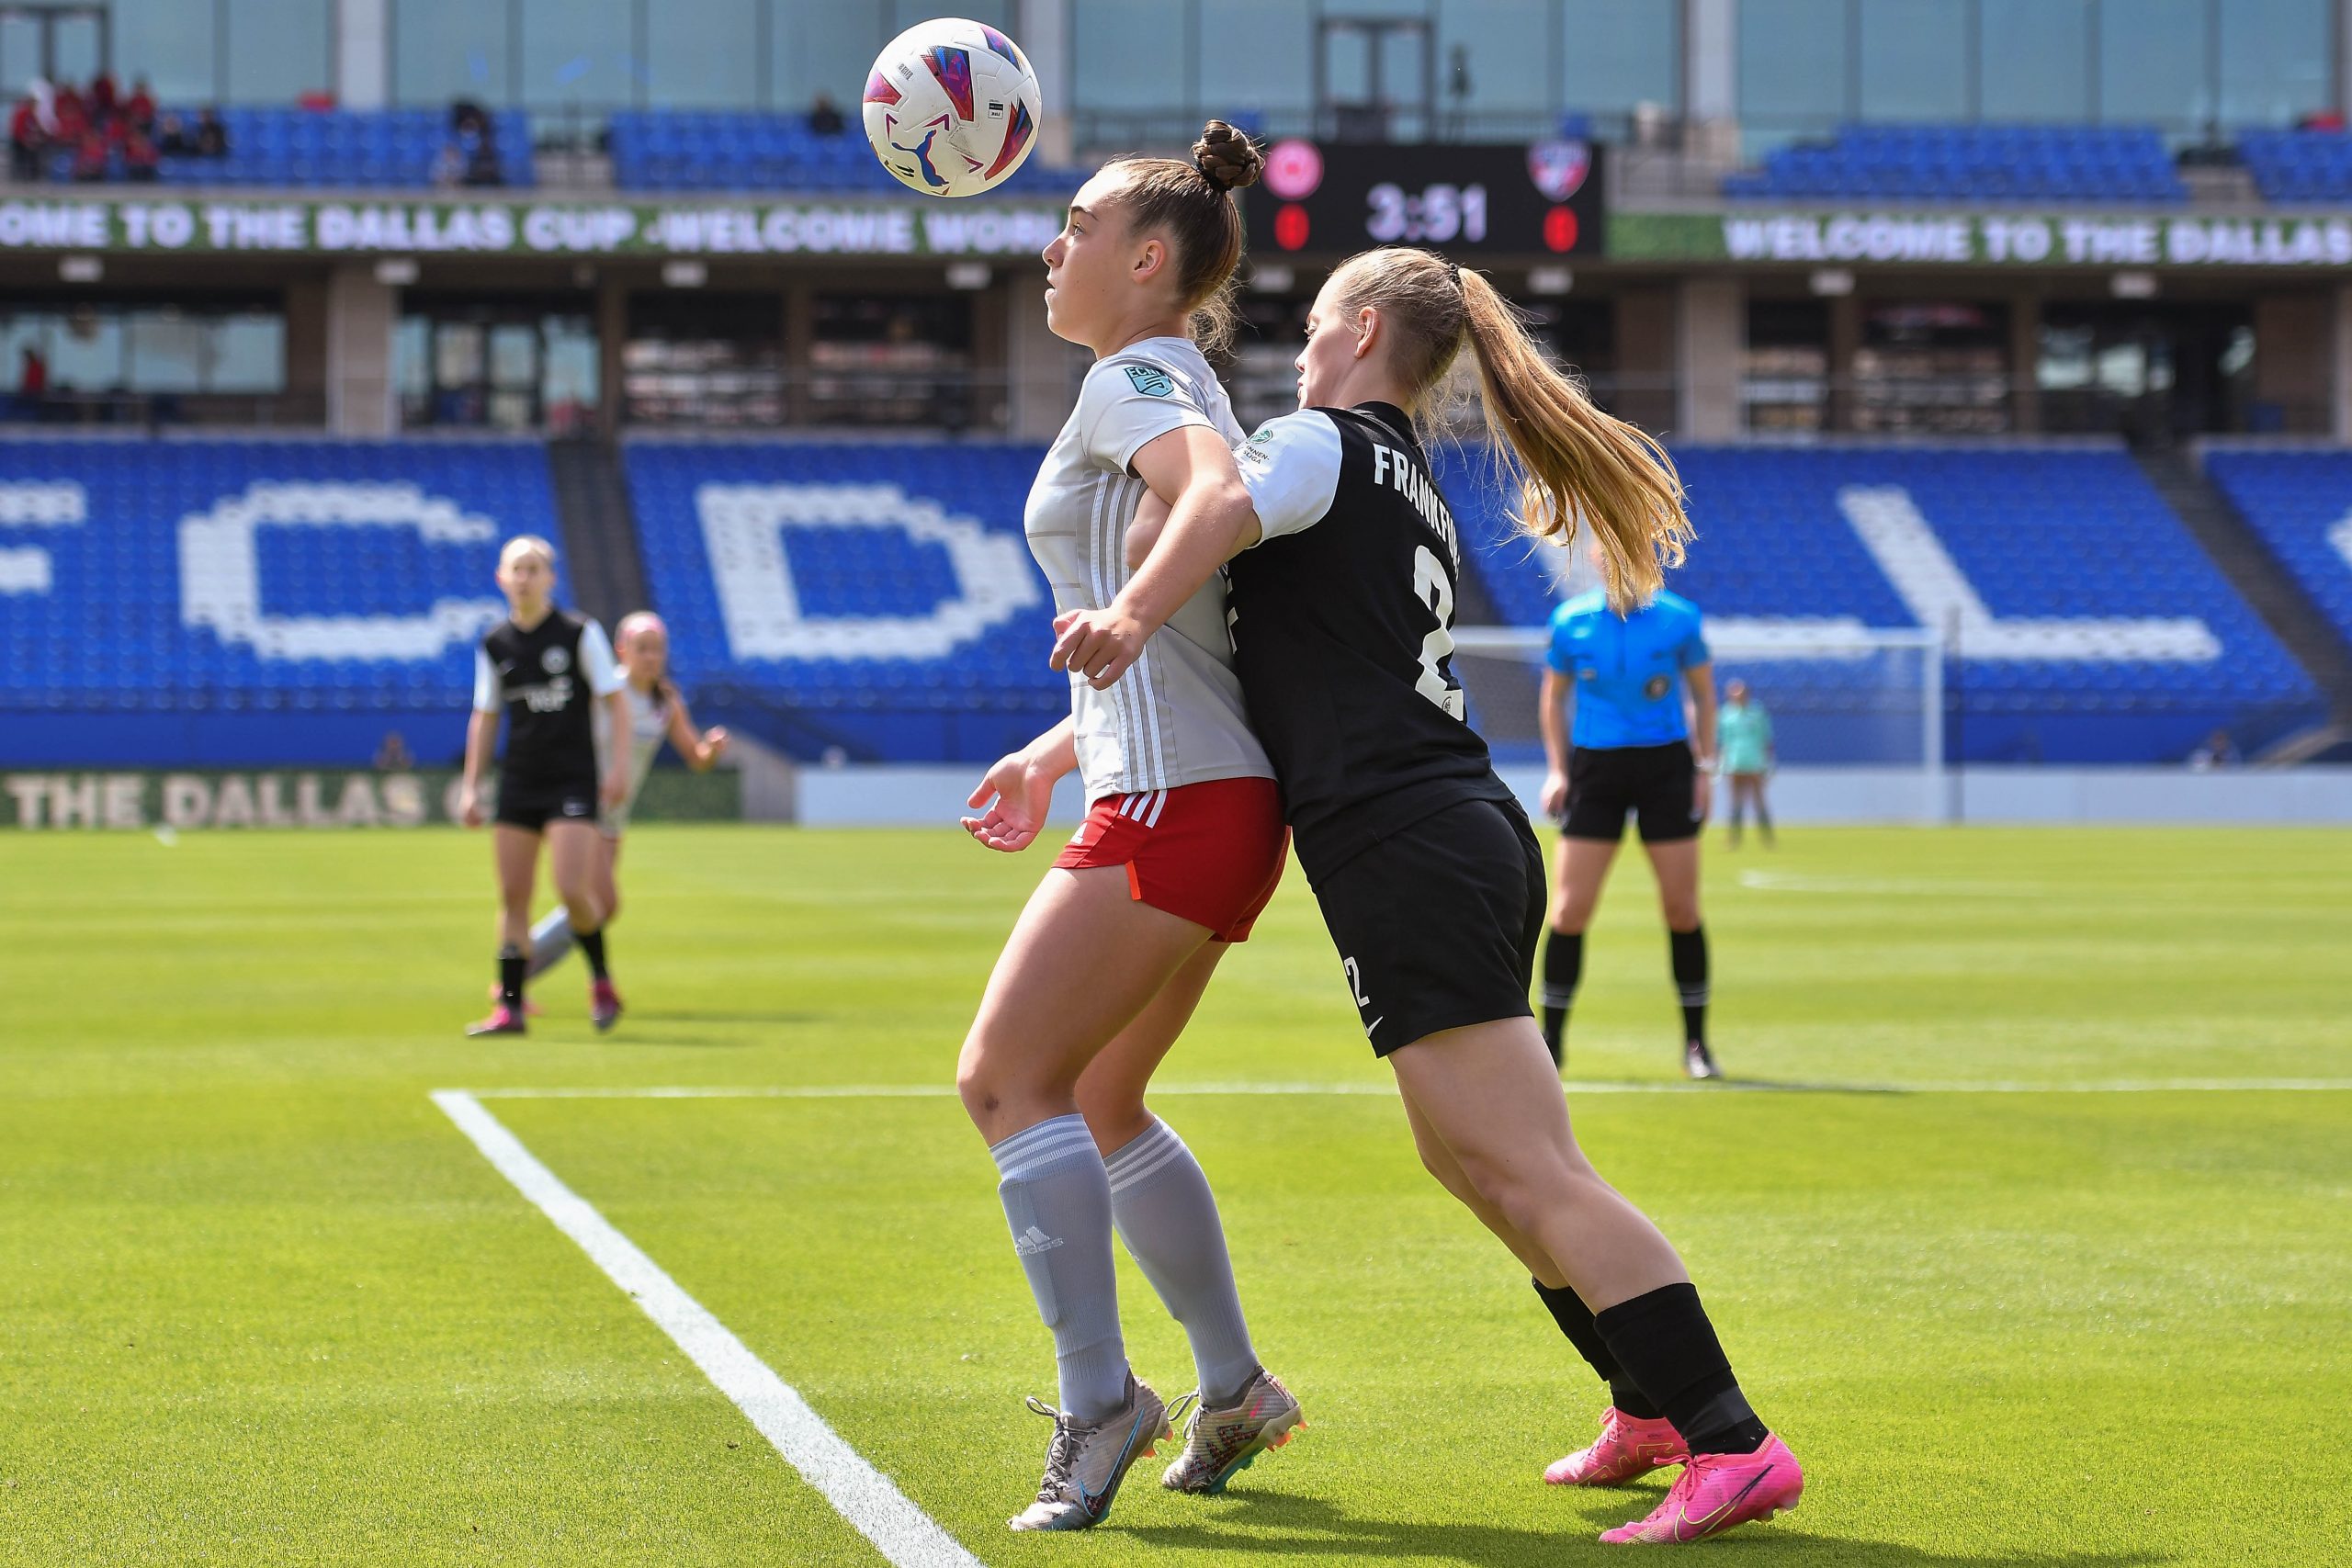 FC Dallas ECNL midfielder Rylee Mclanahan backs up the opposing defender while staring at the ball in the Dallas Cup U17 Final against Eintracht Frankfurt at Toyota Stadium on Saturday, March 29, 2024. (Daniel McCullough, 3rd Degree)